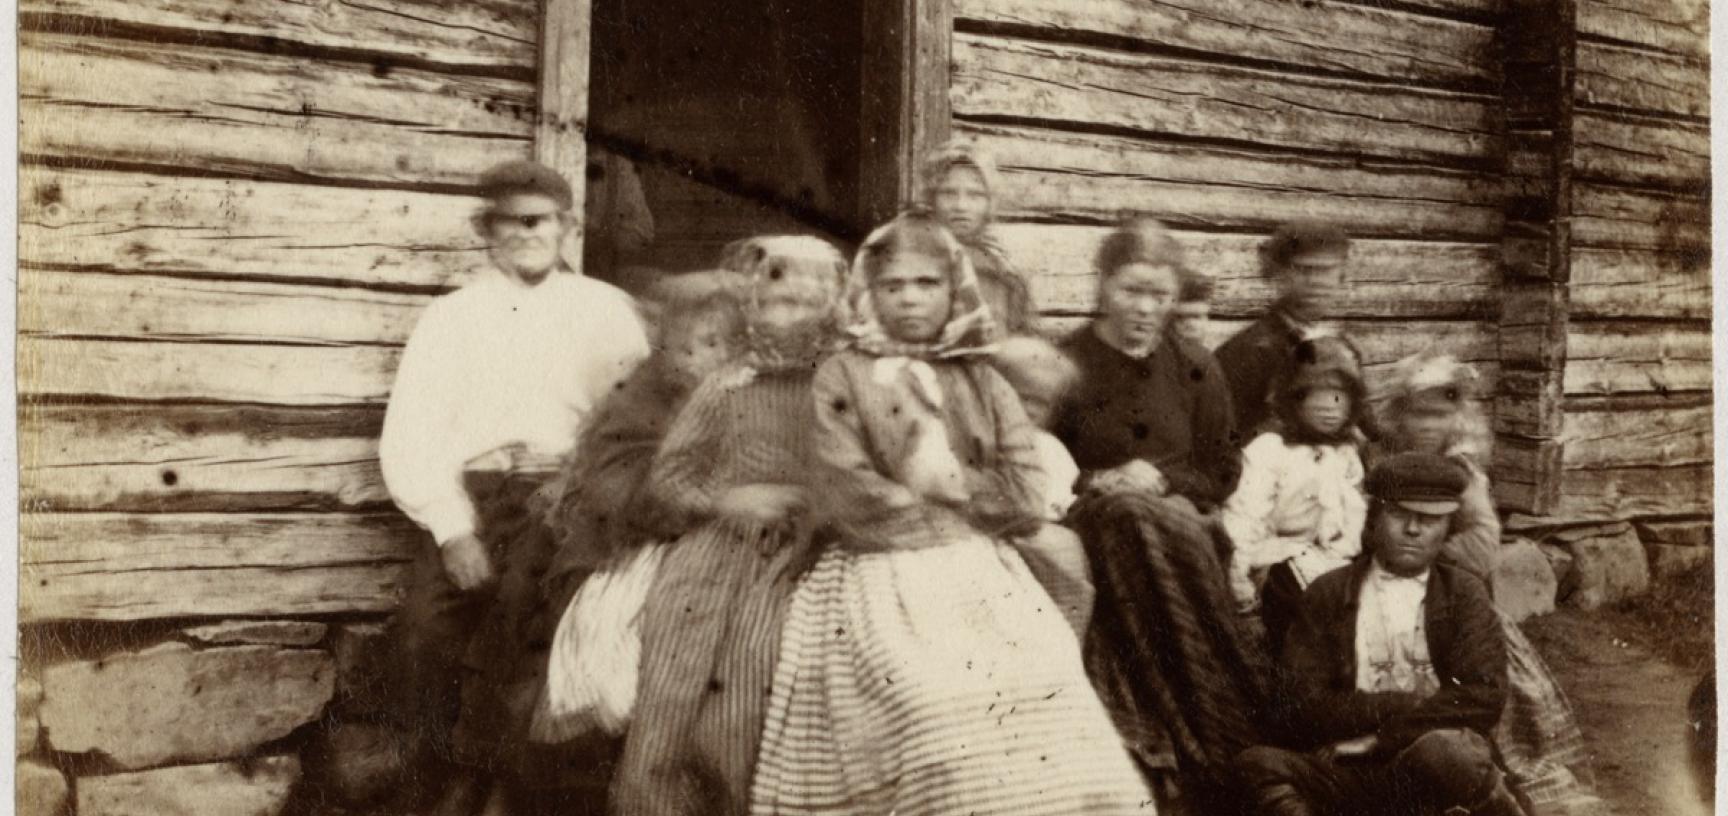 Portrait of a Finnish family. In his diary Evans described photographing such a group: ‘At Rungam, where we once more crossed the river Kemi, I tried taking a photograph of a large group of Finns, & actually succeeded in getting them to sit, but when the 